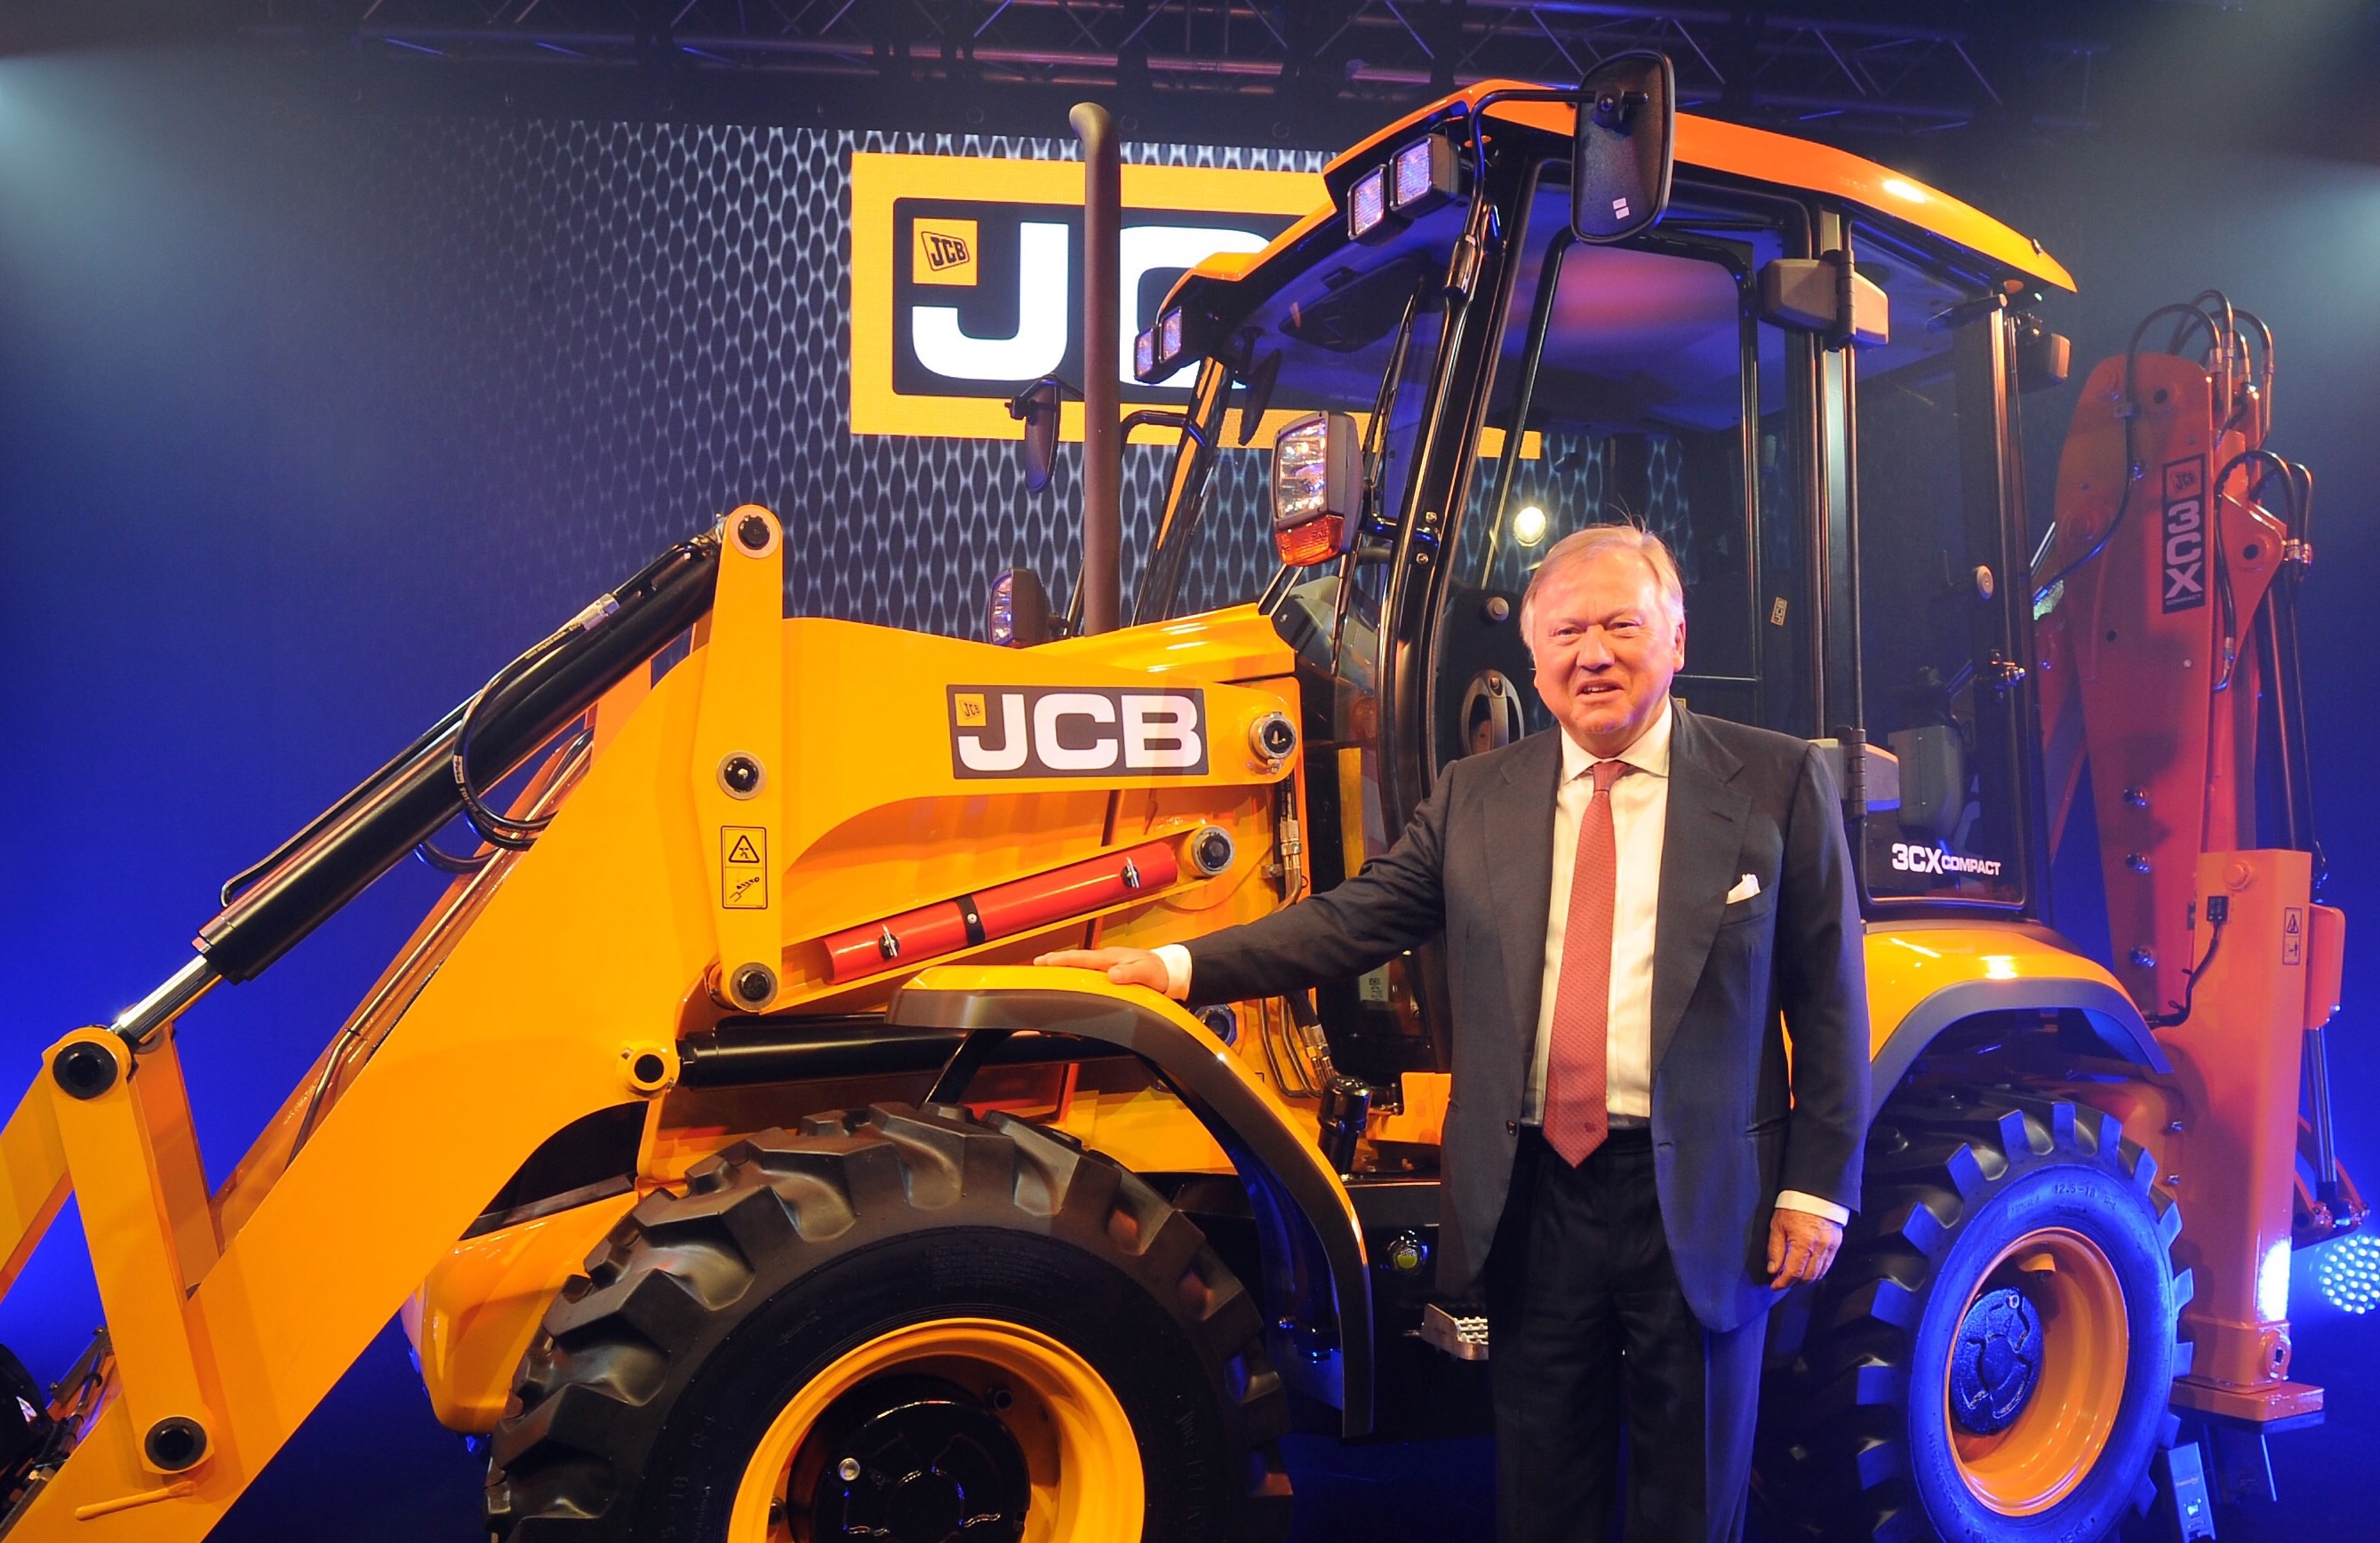 Who is the Brexit-supporting Lord Bamford of JCB fame?, JCB